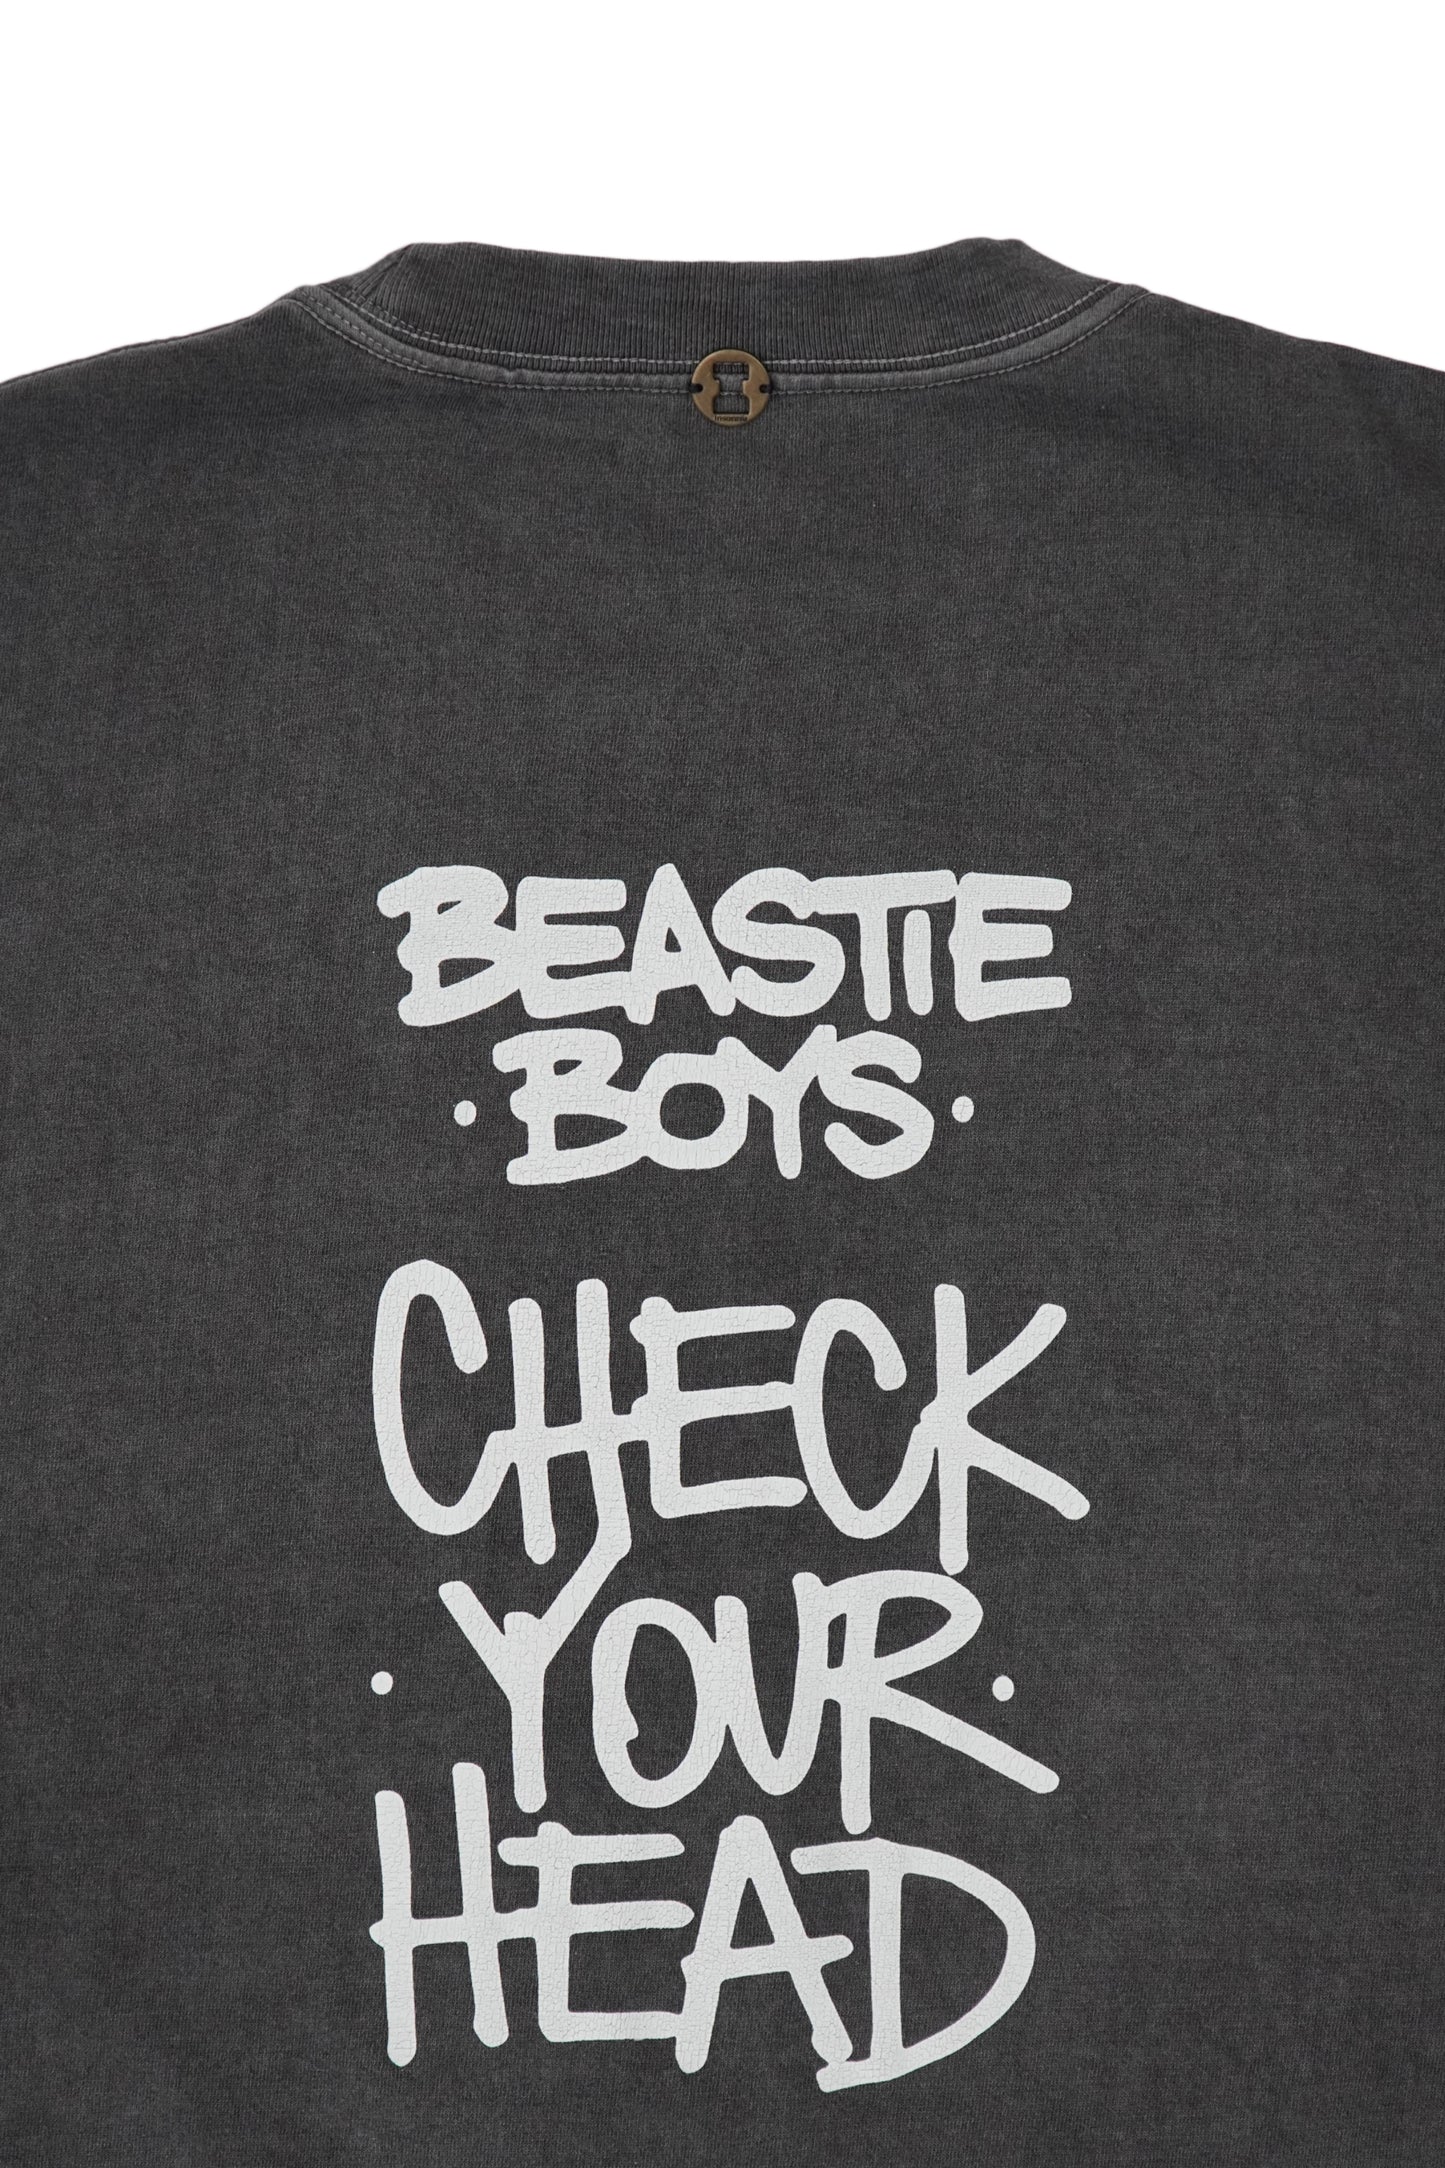 INSONNIA PROJECTS / BEASTIE BOYS CHECK YOUR HEAD PHOTO T-SHIRT